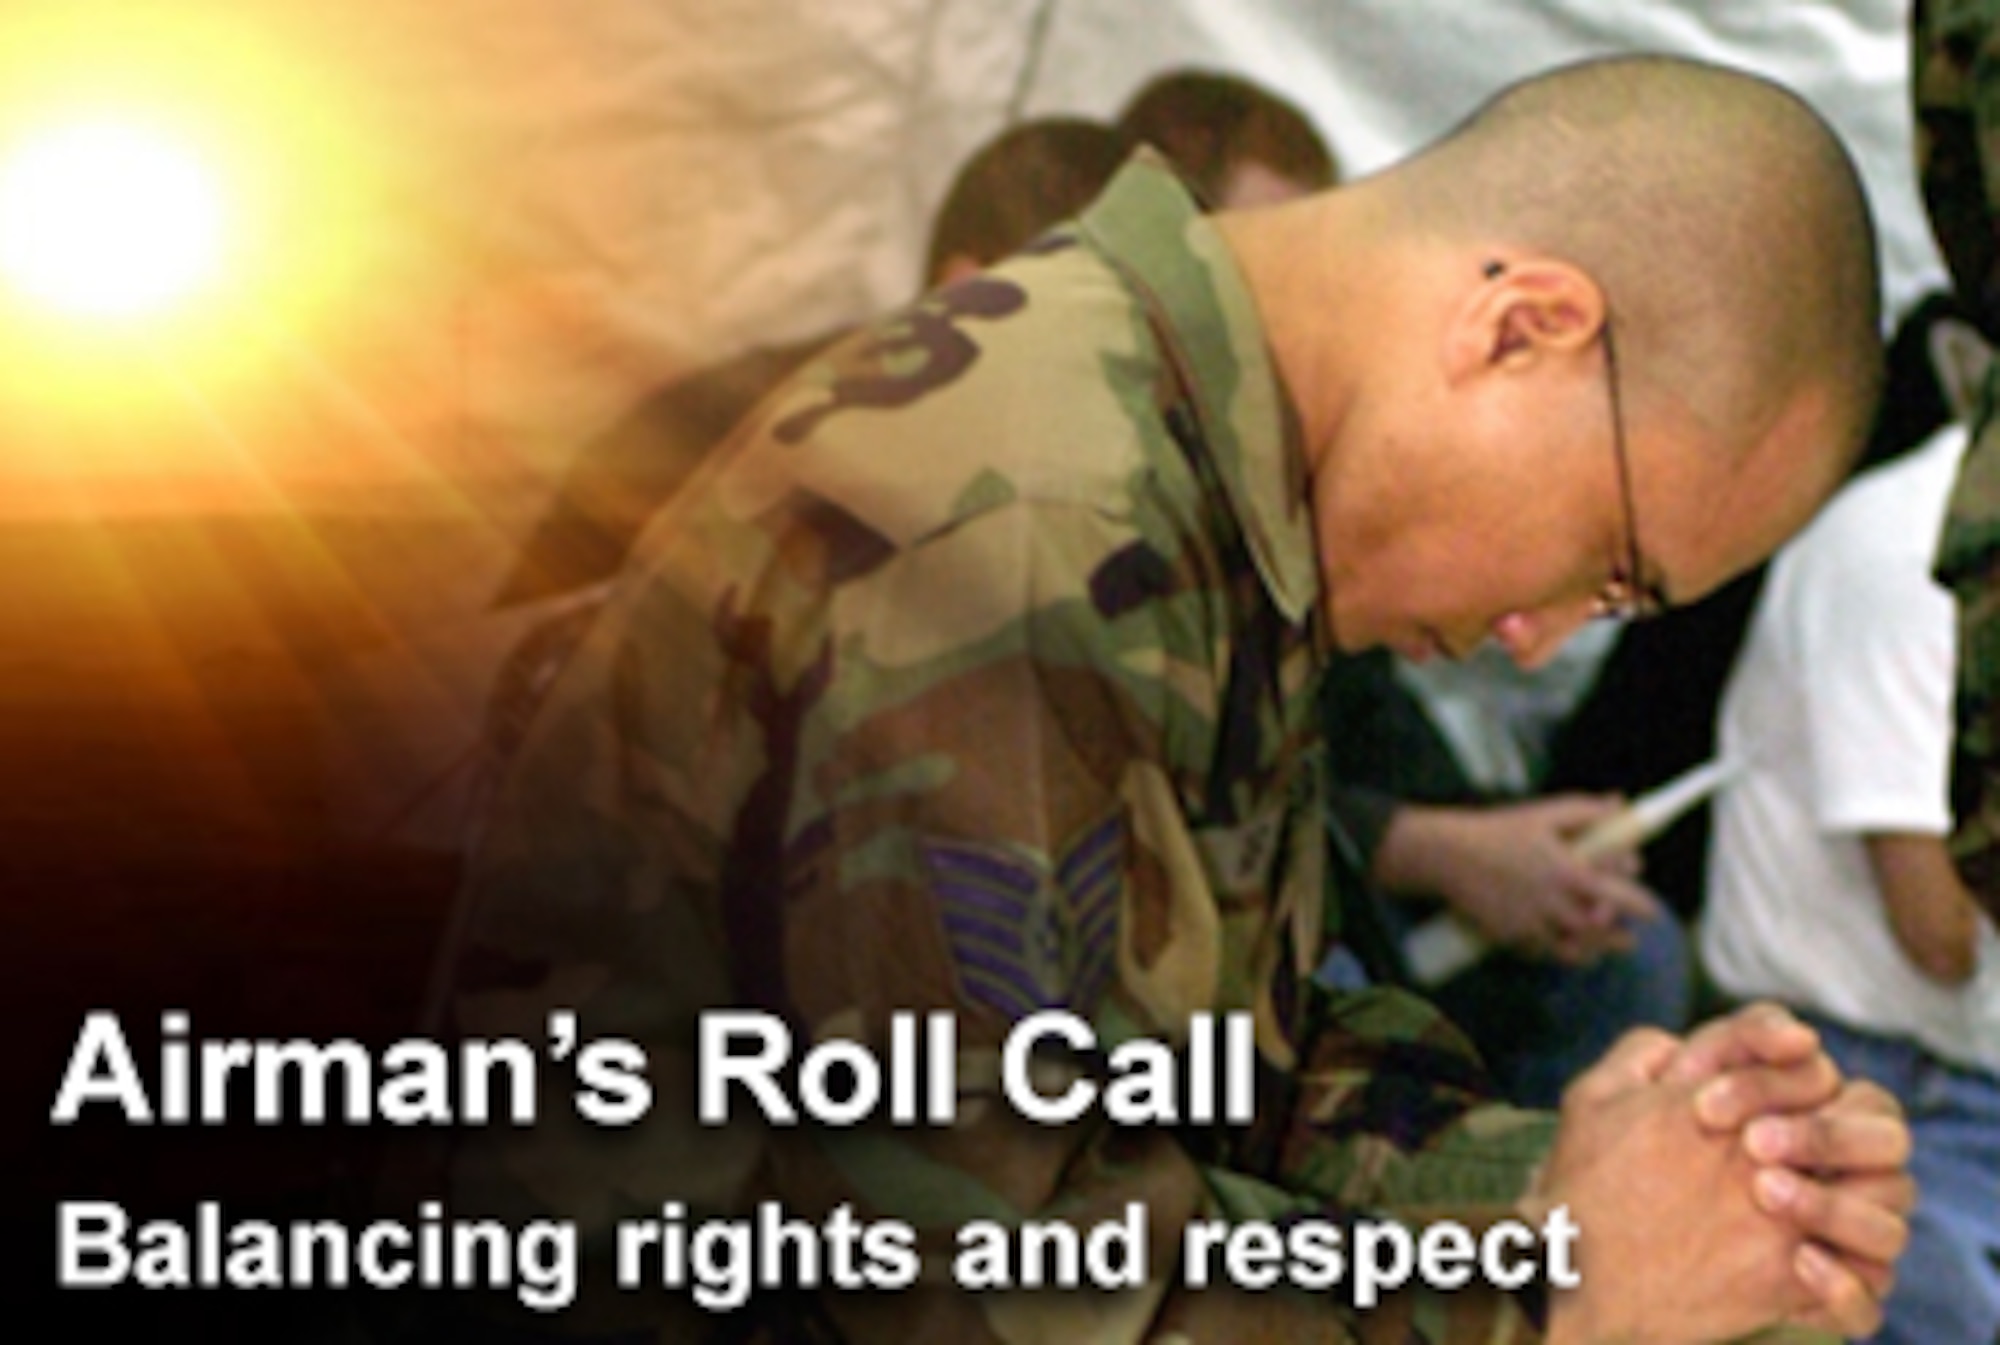 This week's Airman's Roll Call highlights Airmen's rights to practice their beliefs while respecting the beliefs of others. (U.S. Air Force graphic/Luke Borland) 